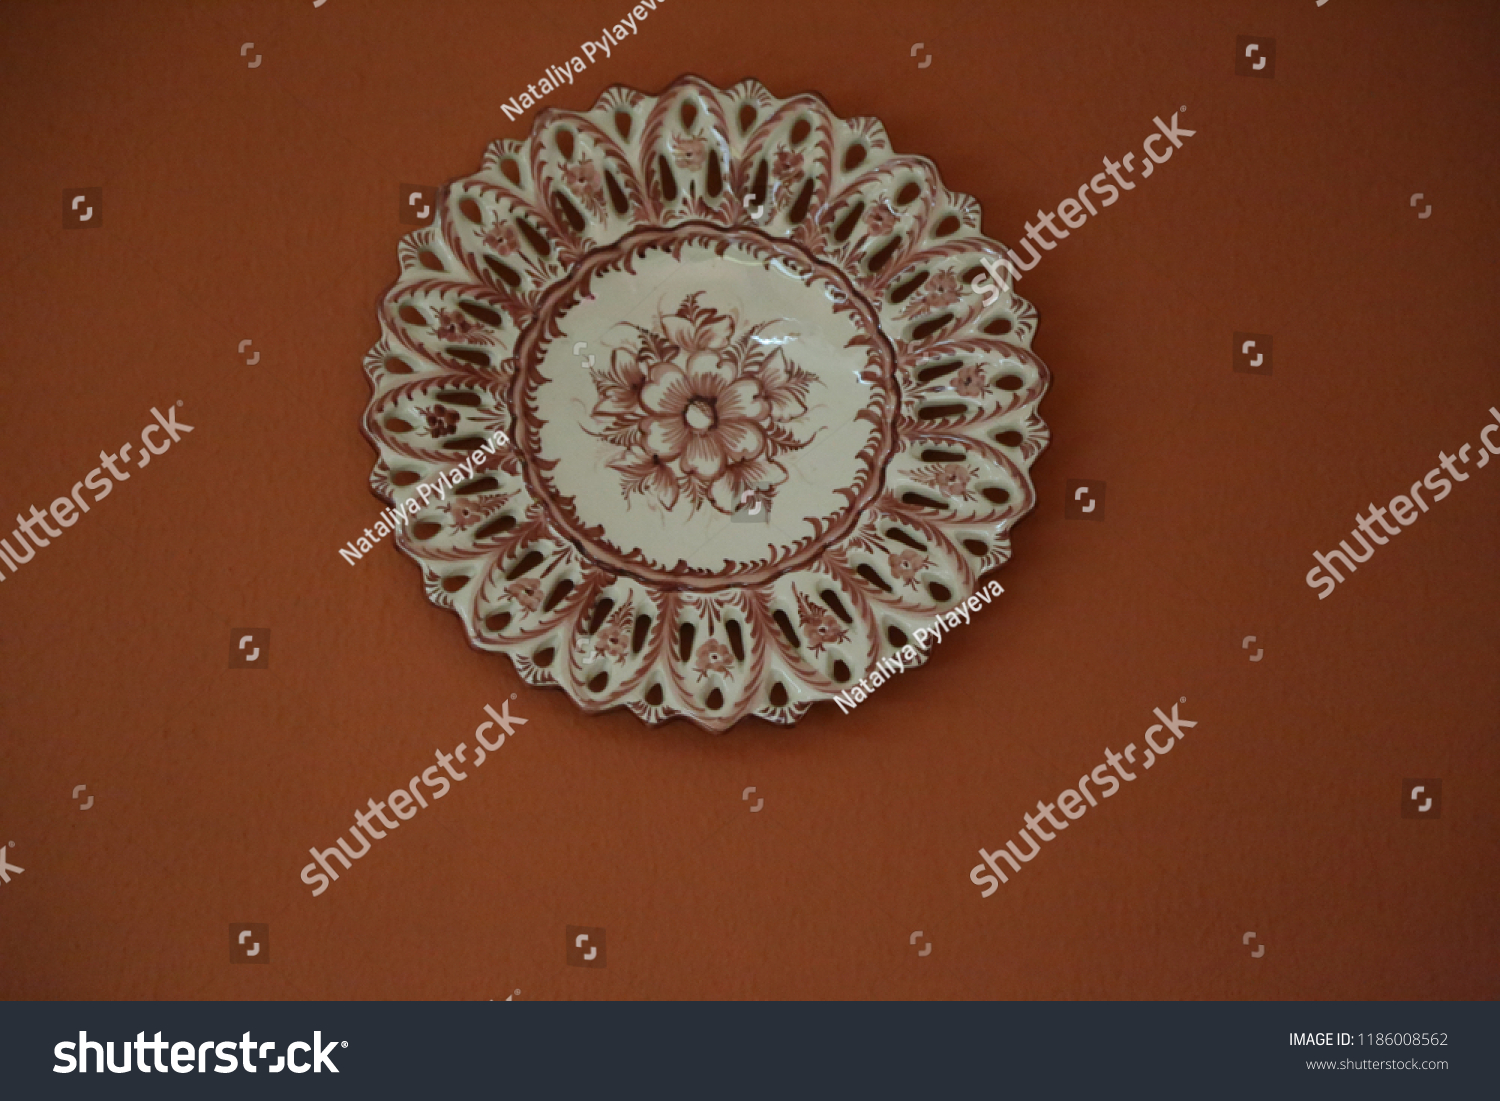 Restaurante Central do Bom Jesus,brown white ceramic traditional national plate with text and flower pattern hanging on the wall #1186008562